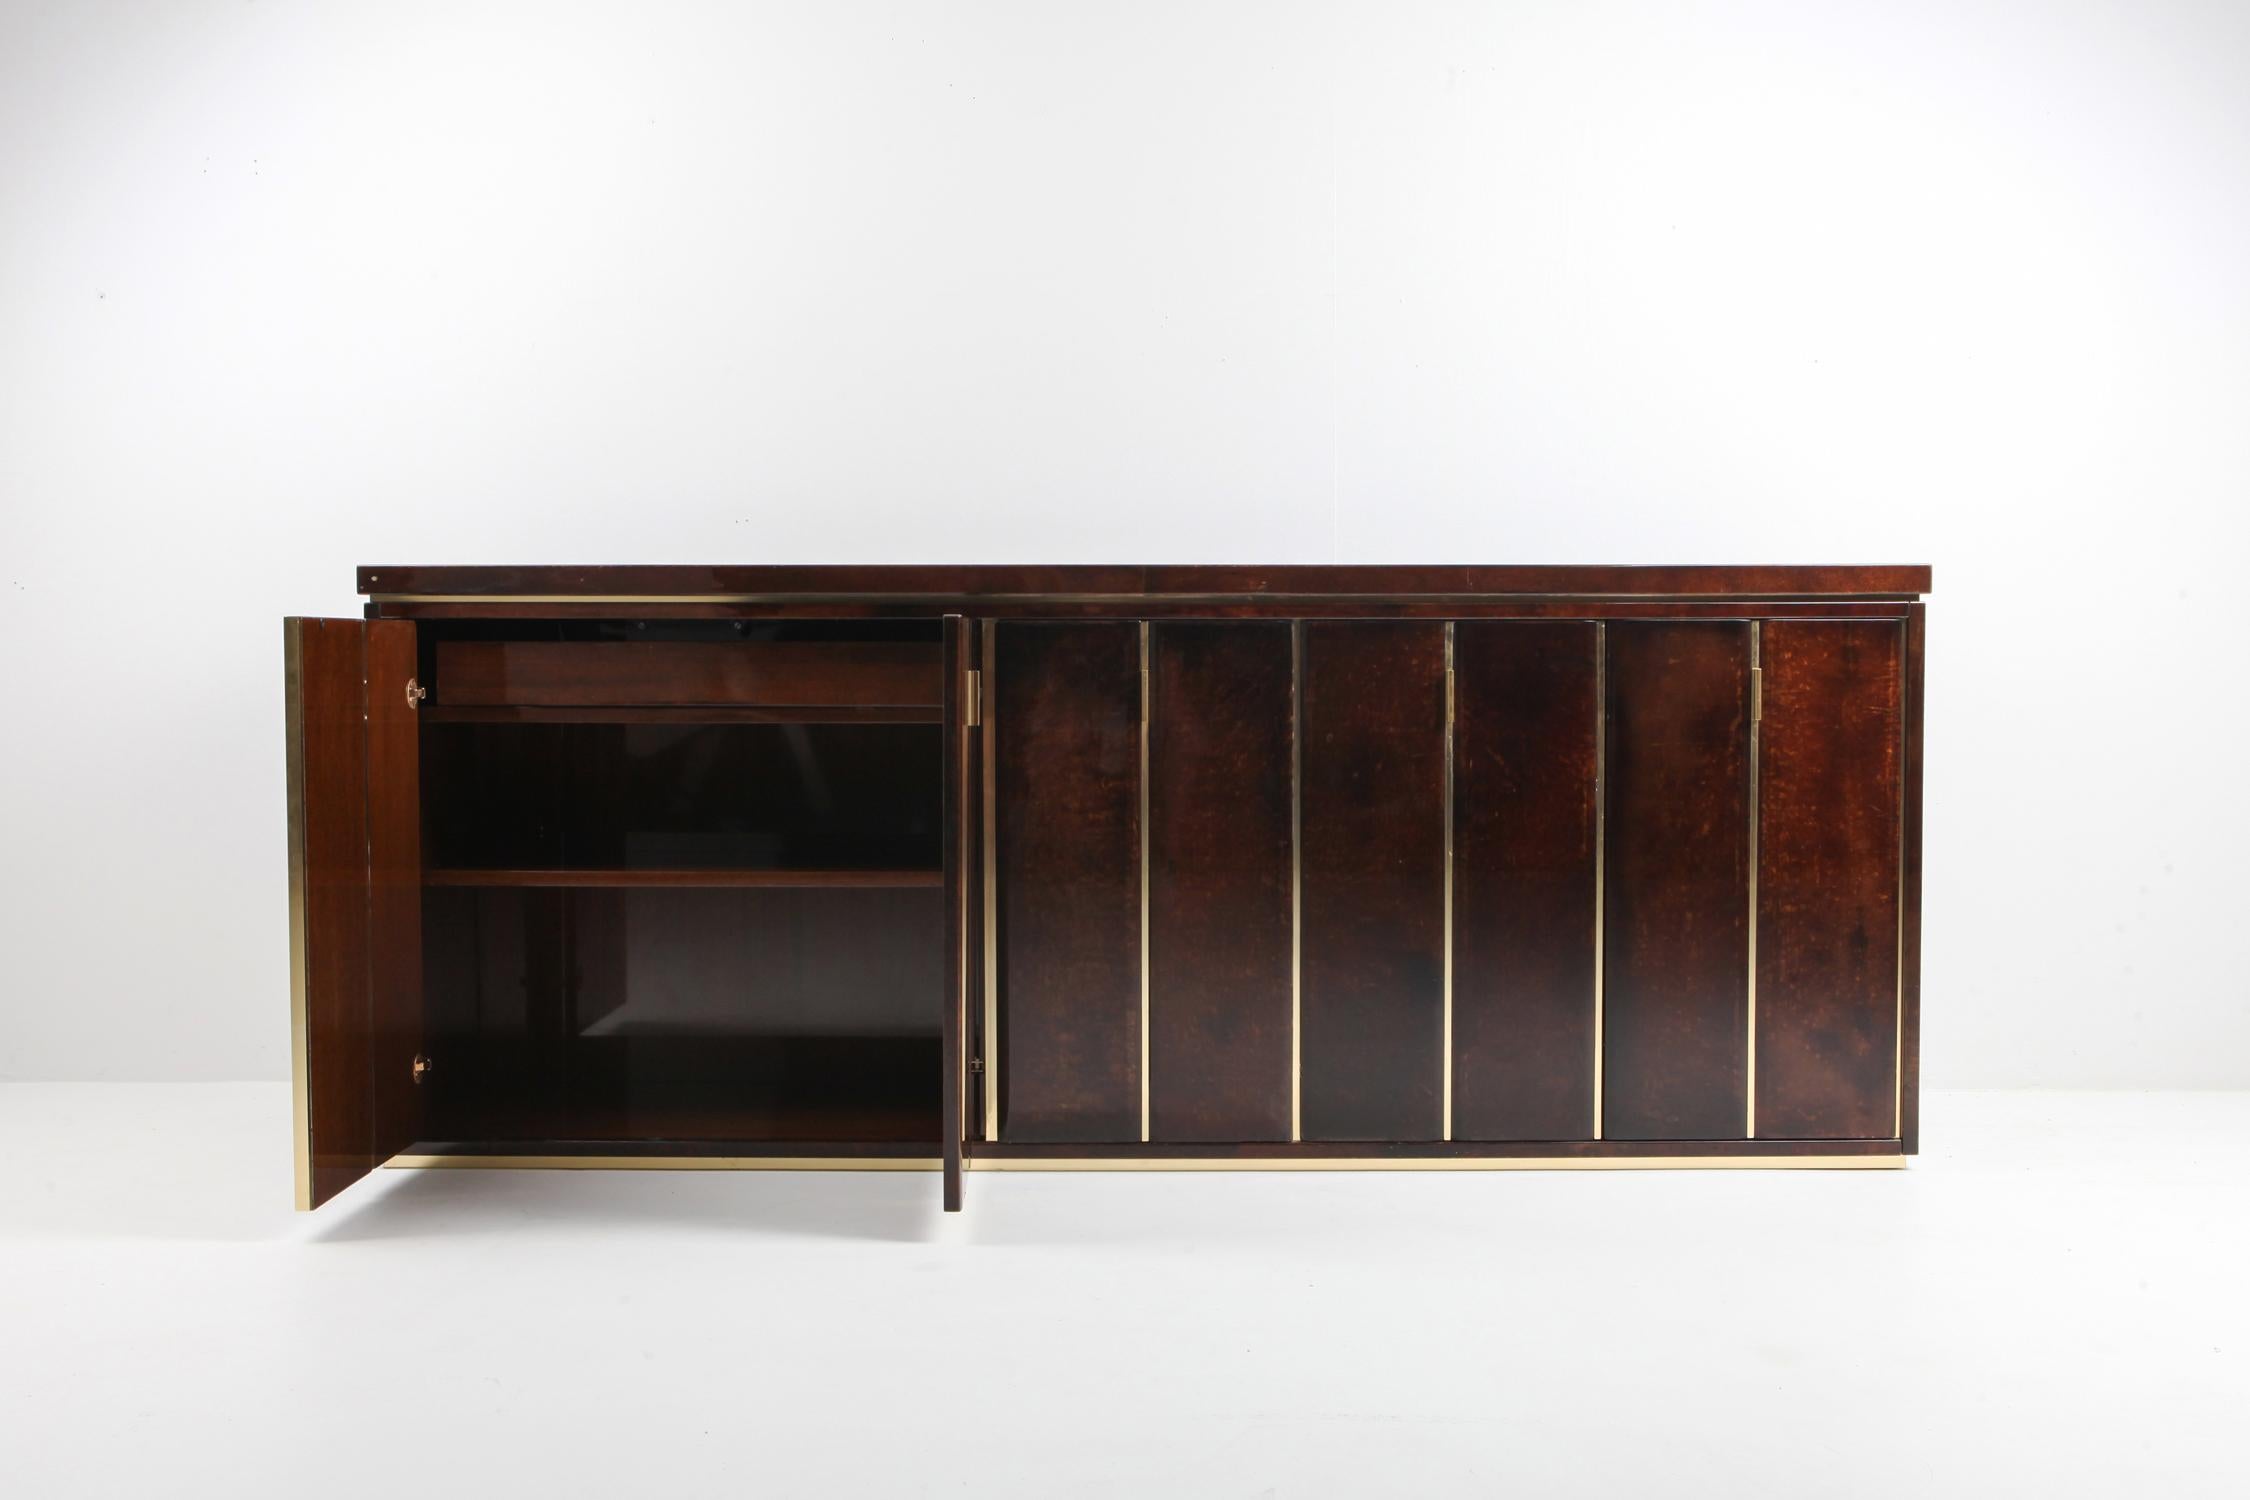 European Aldo Tura High End Credenza in Brass and Parchment